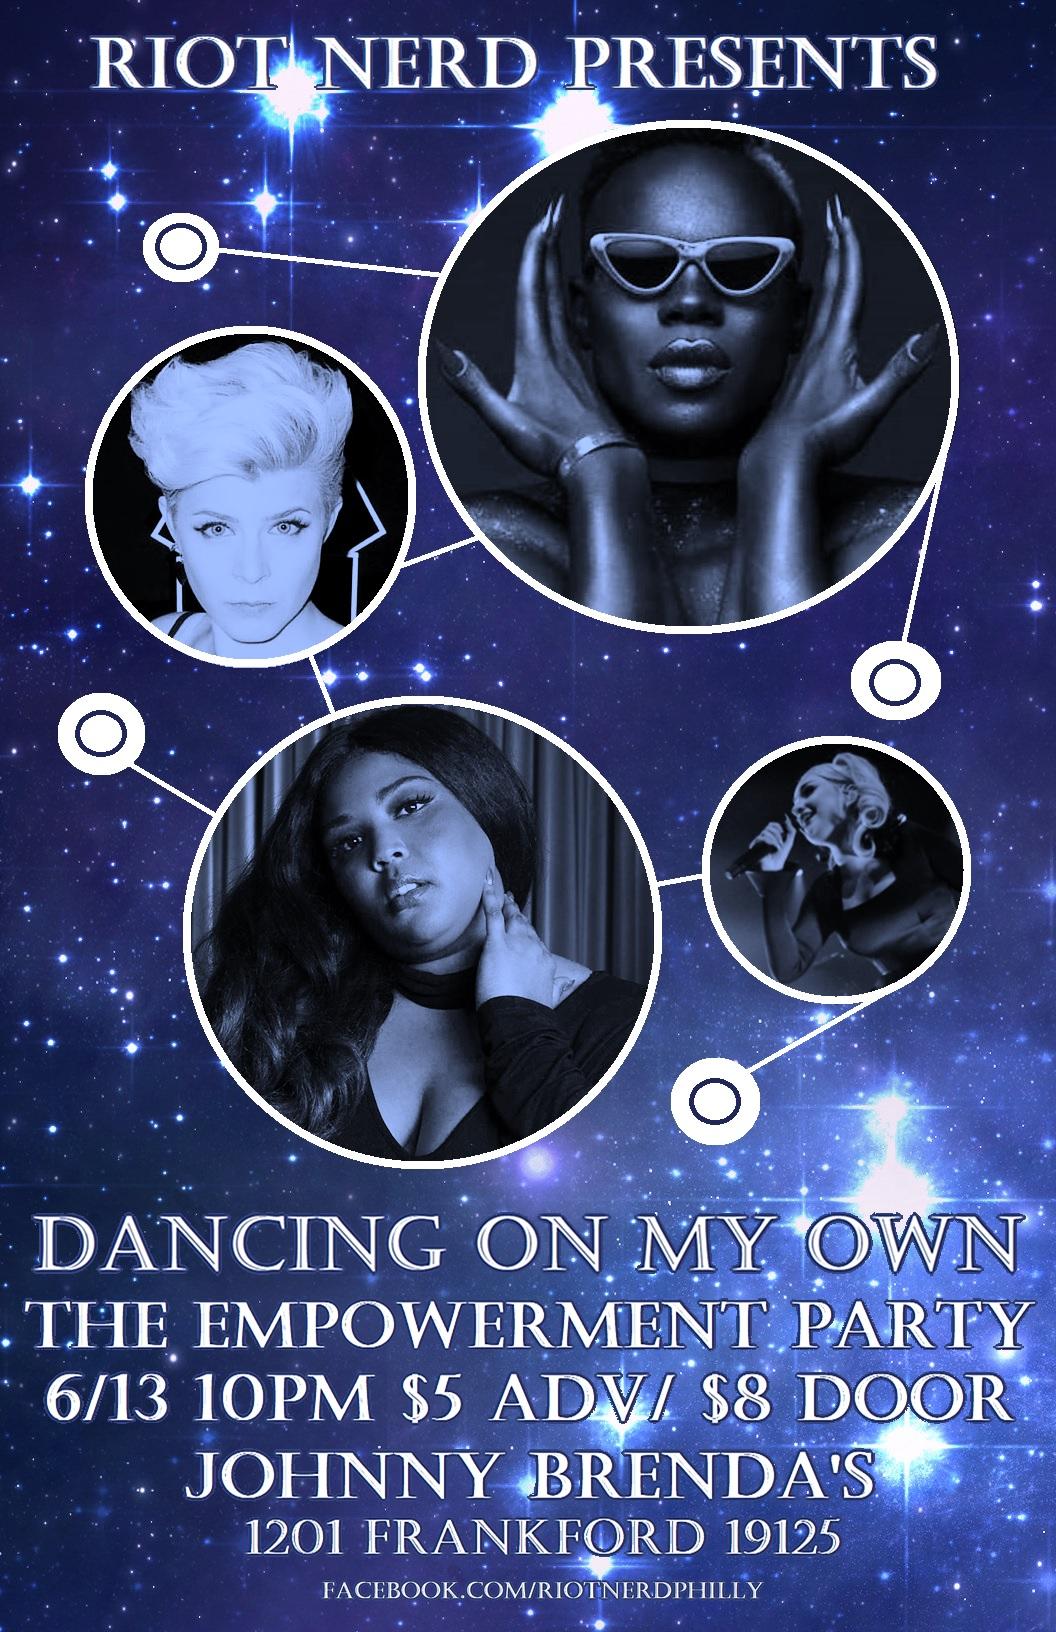 Dancing On My Own - An Empowerment Party